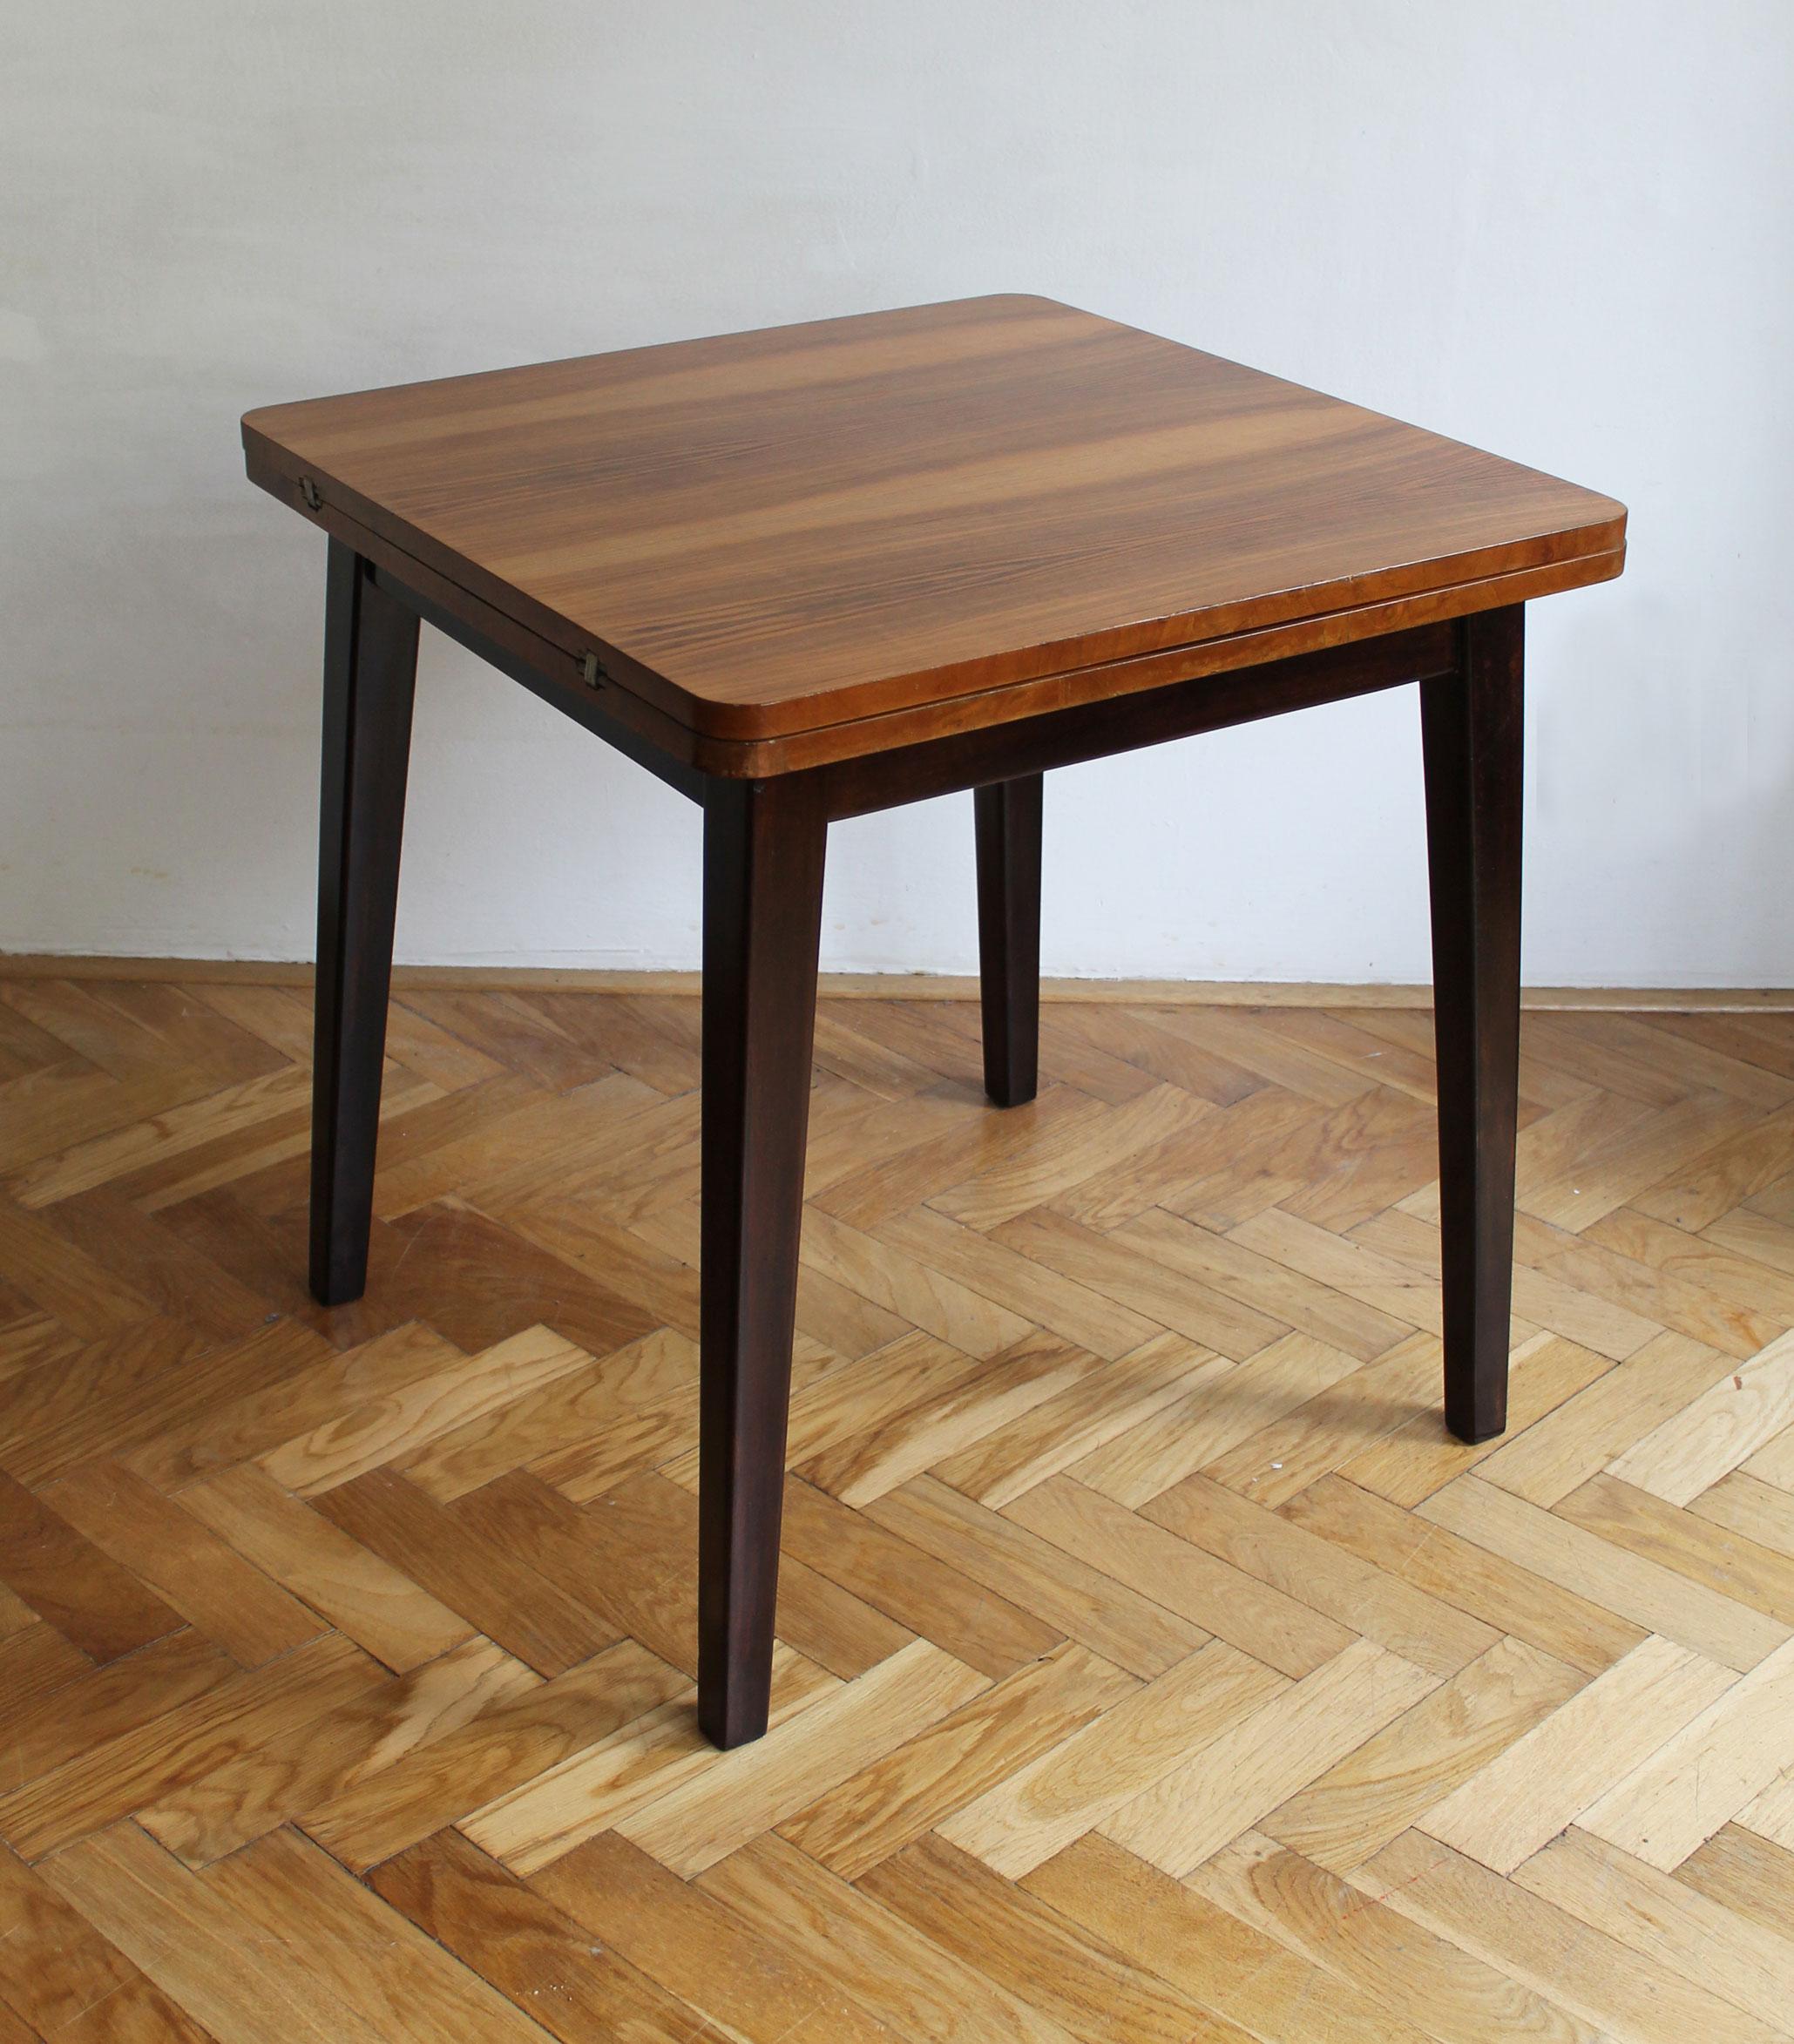 This is an original extendable side/coffee table consists of a solid wood table top which has a beautiful walnut veneer and legs made of dark brown stained Beechwood. It operates as an extendable table, with a full length of 132 cm. The main design